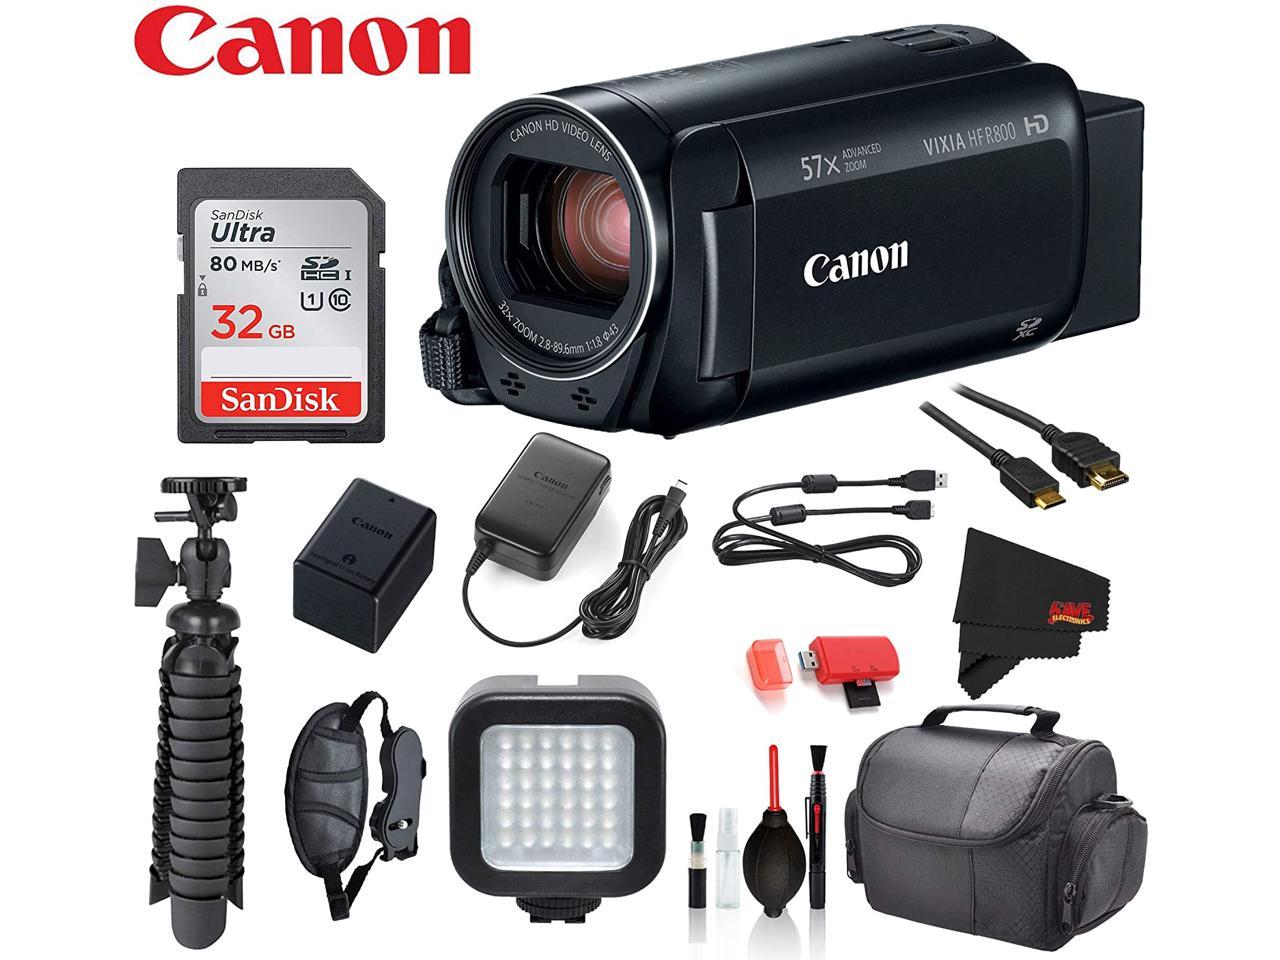 Canon VIXIA HF R800 Camcorder (Black) with – SanDisk 32gb SD card + Deluxe Cleaning Kit + 12” Tripod + MORE